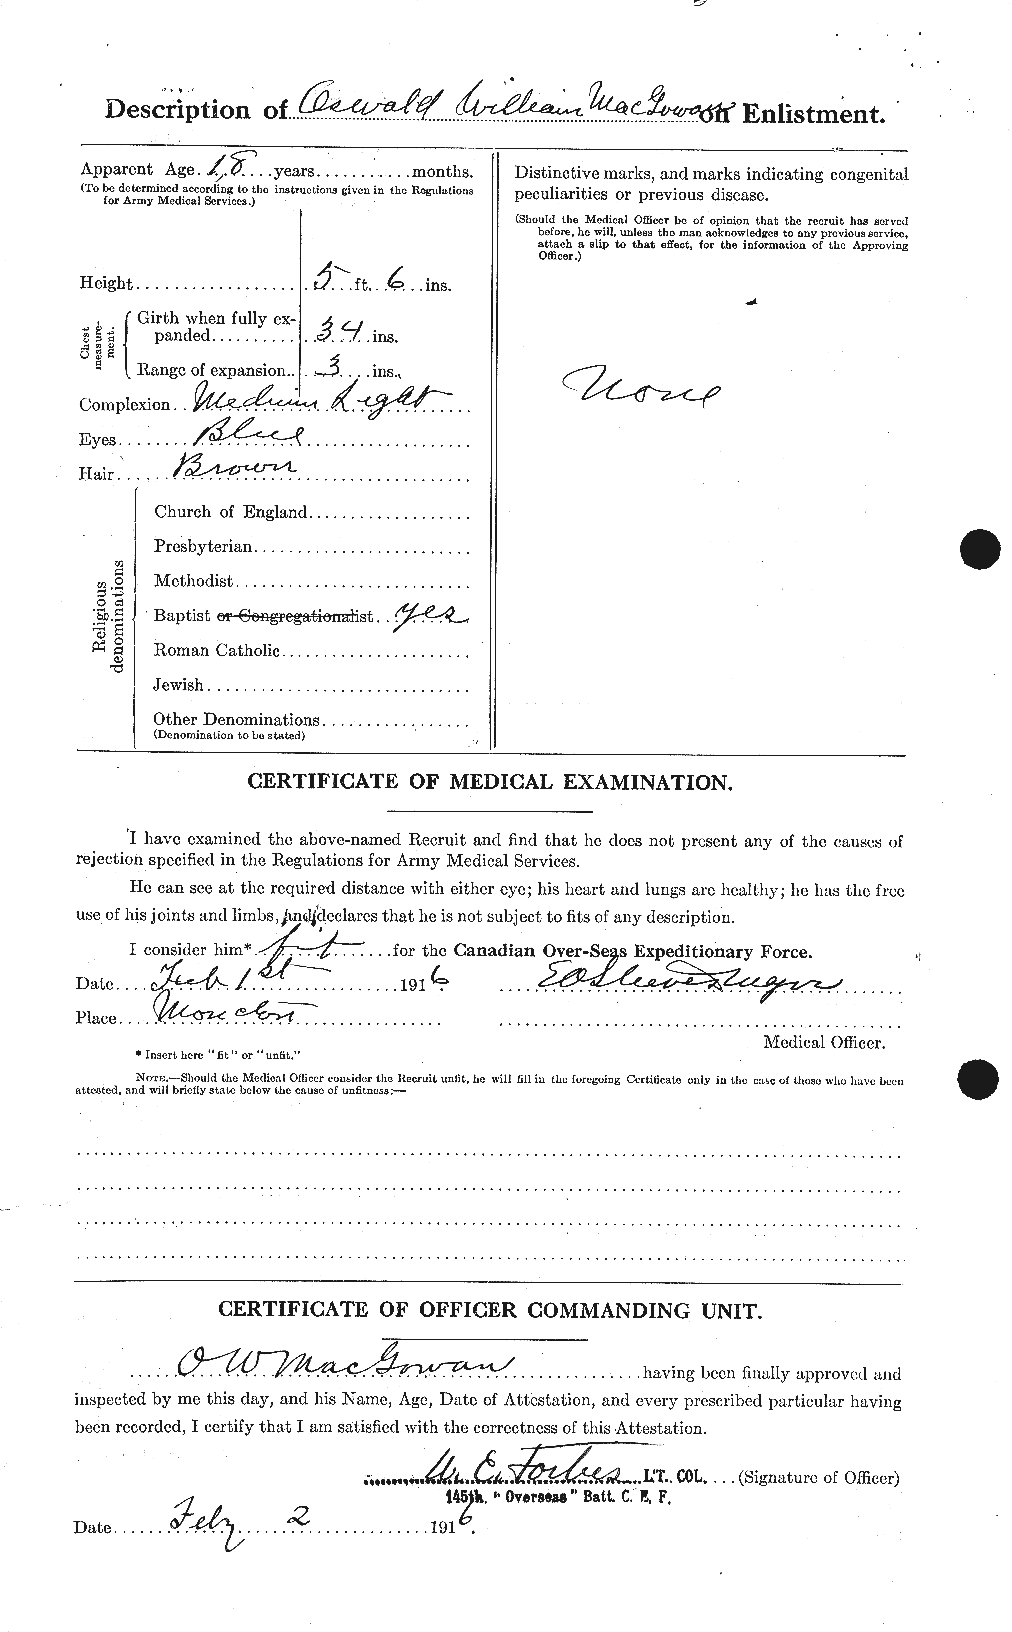 Personnel Records of the First World War - CEF 523196b